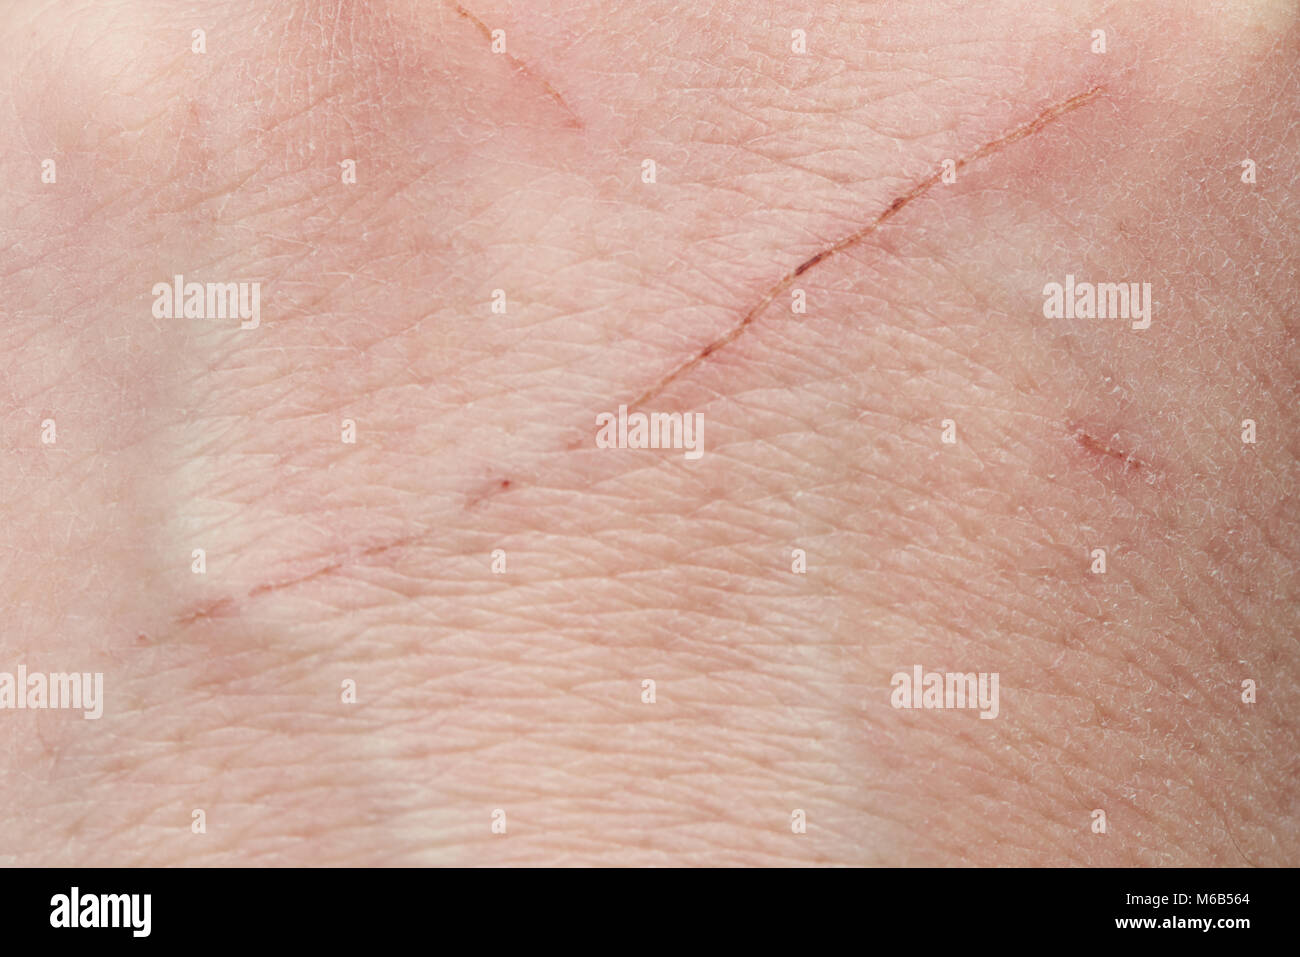 Cut from cat on human skin macro close up Stock Photo